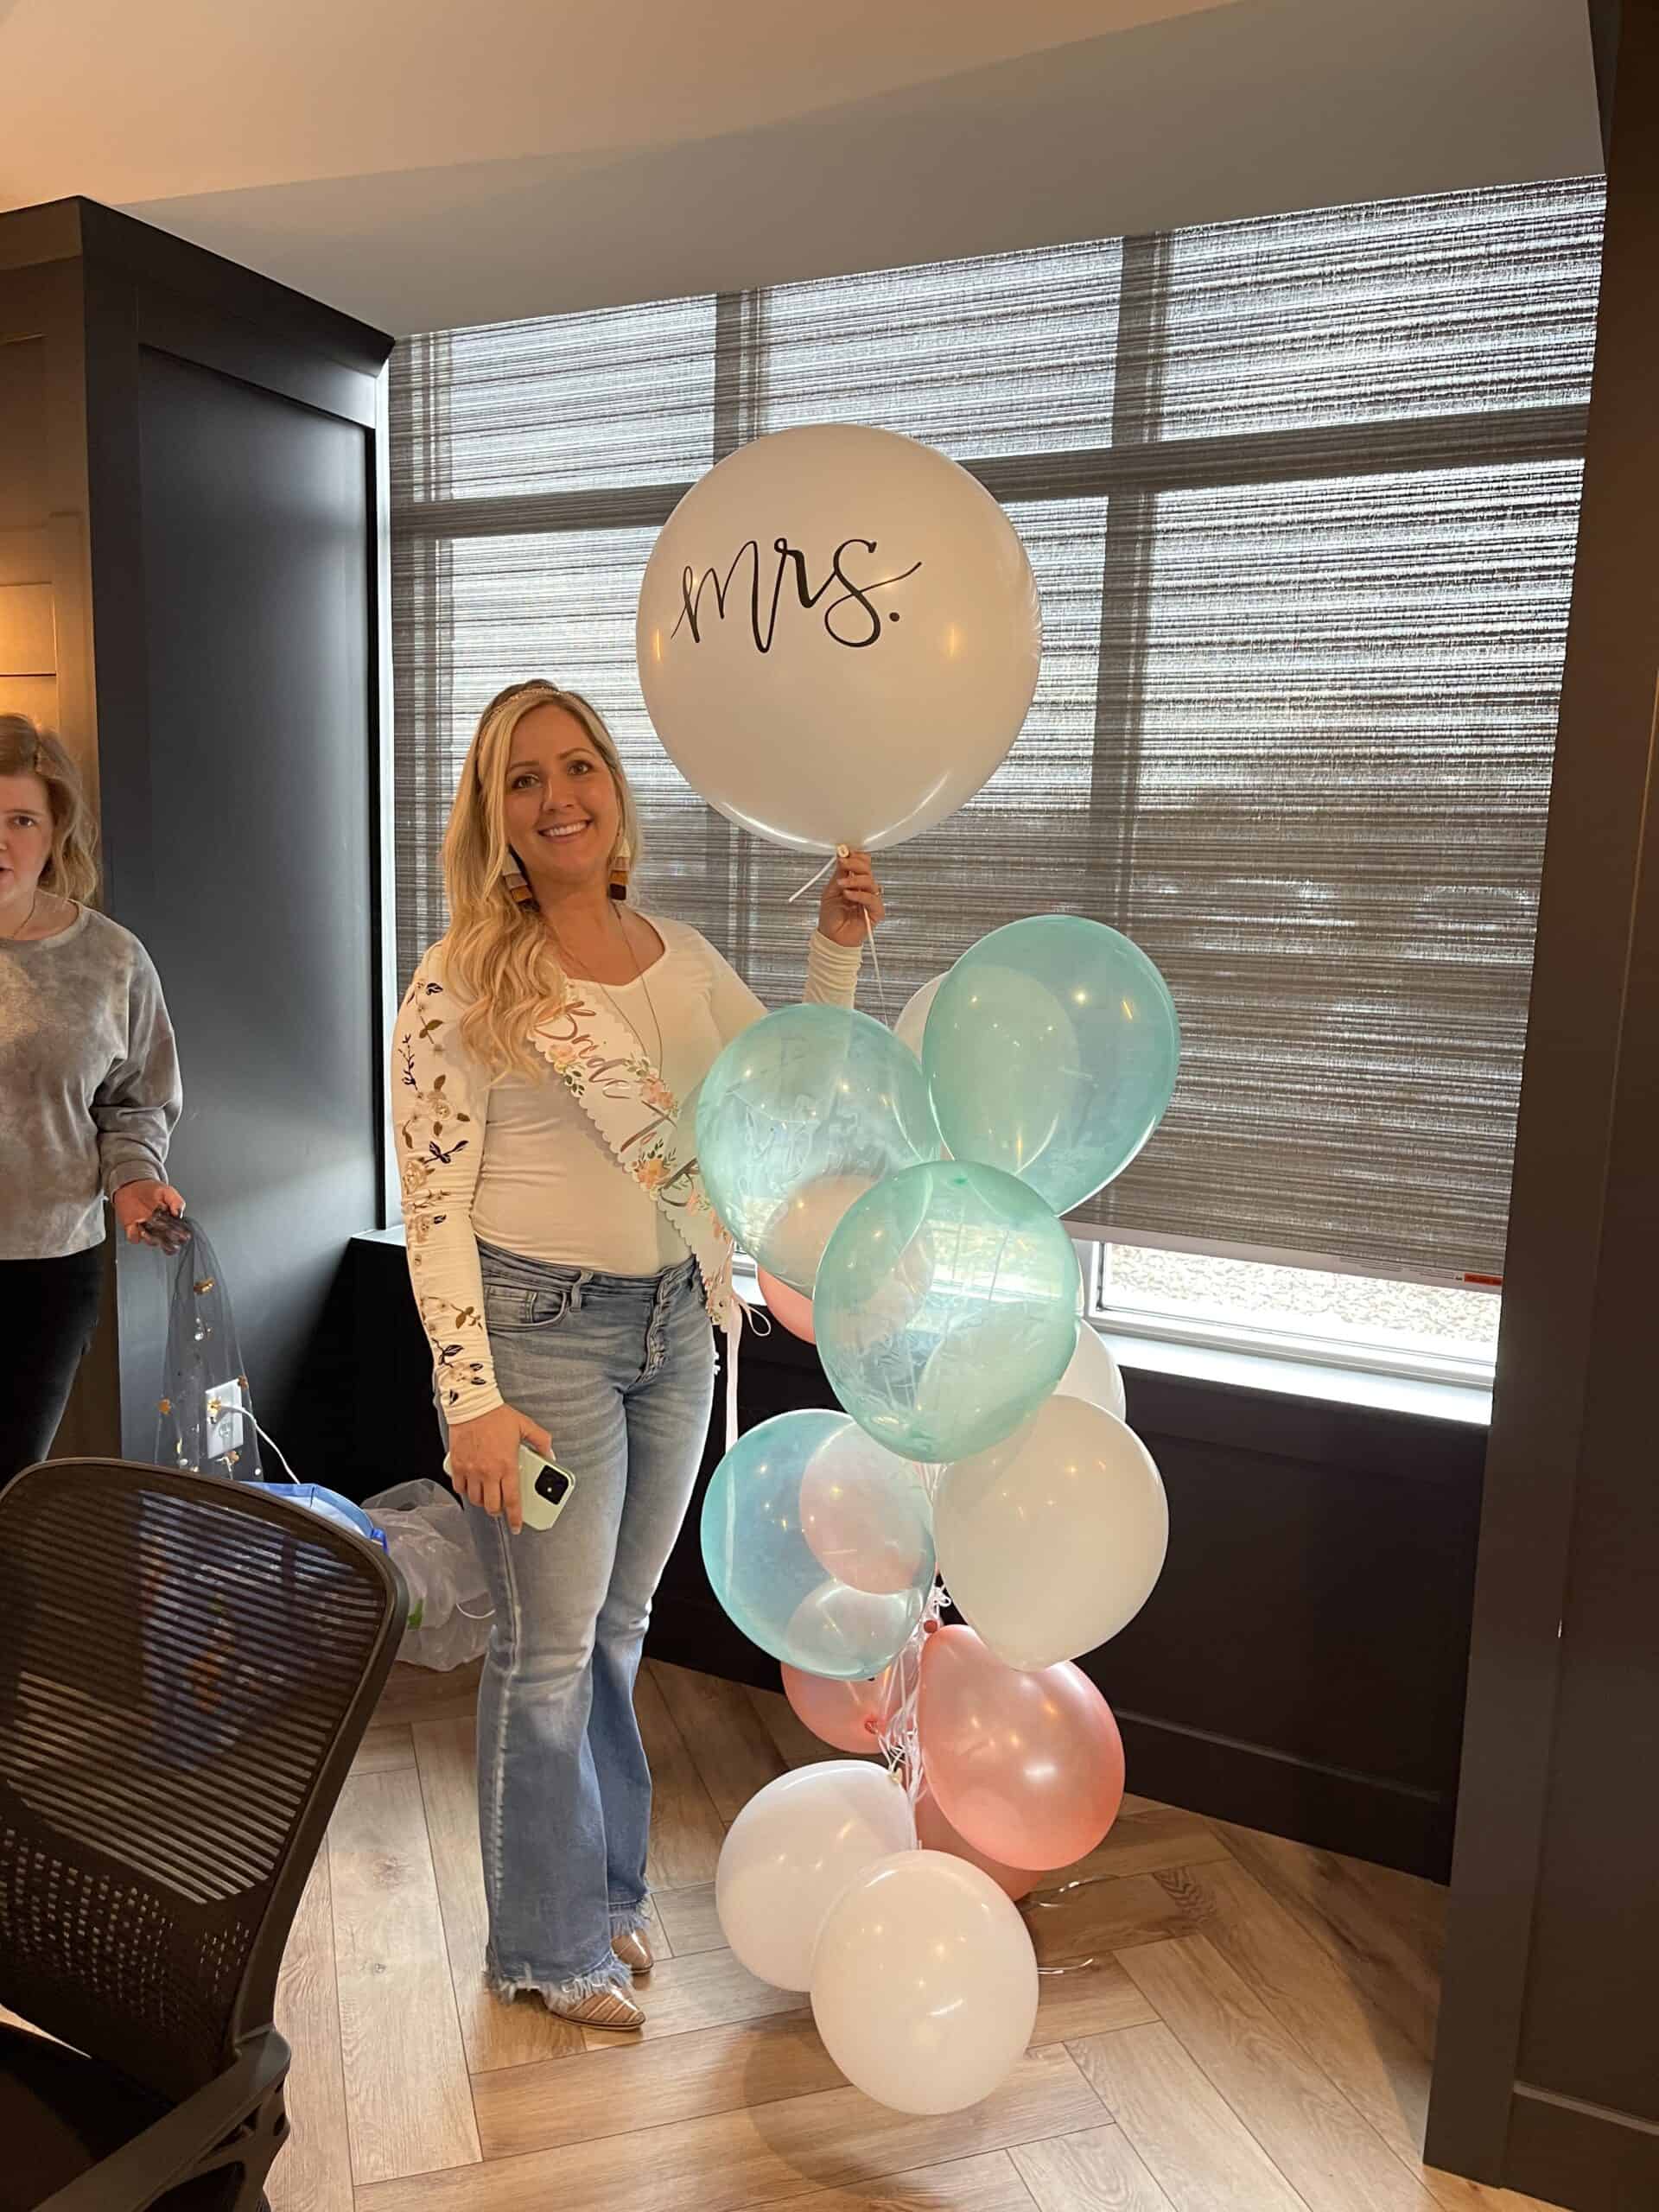 Nicholas Design Build | Two women standing next to balloons with the word mrs.